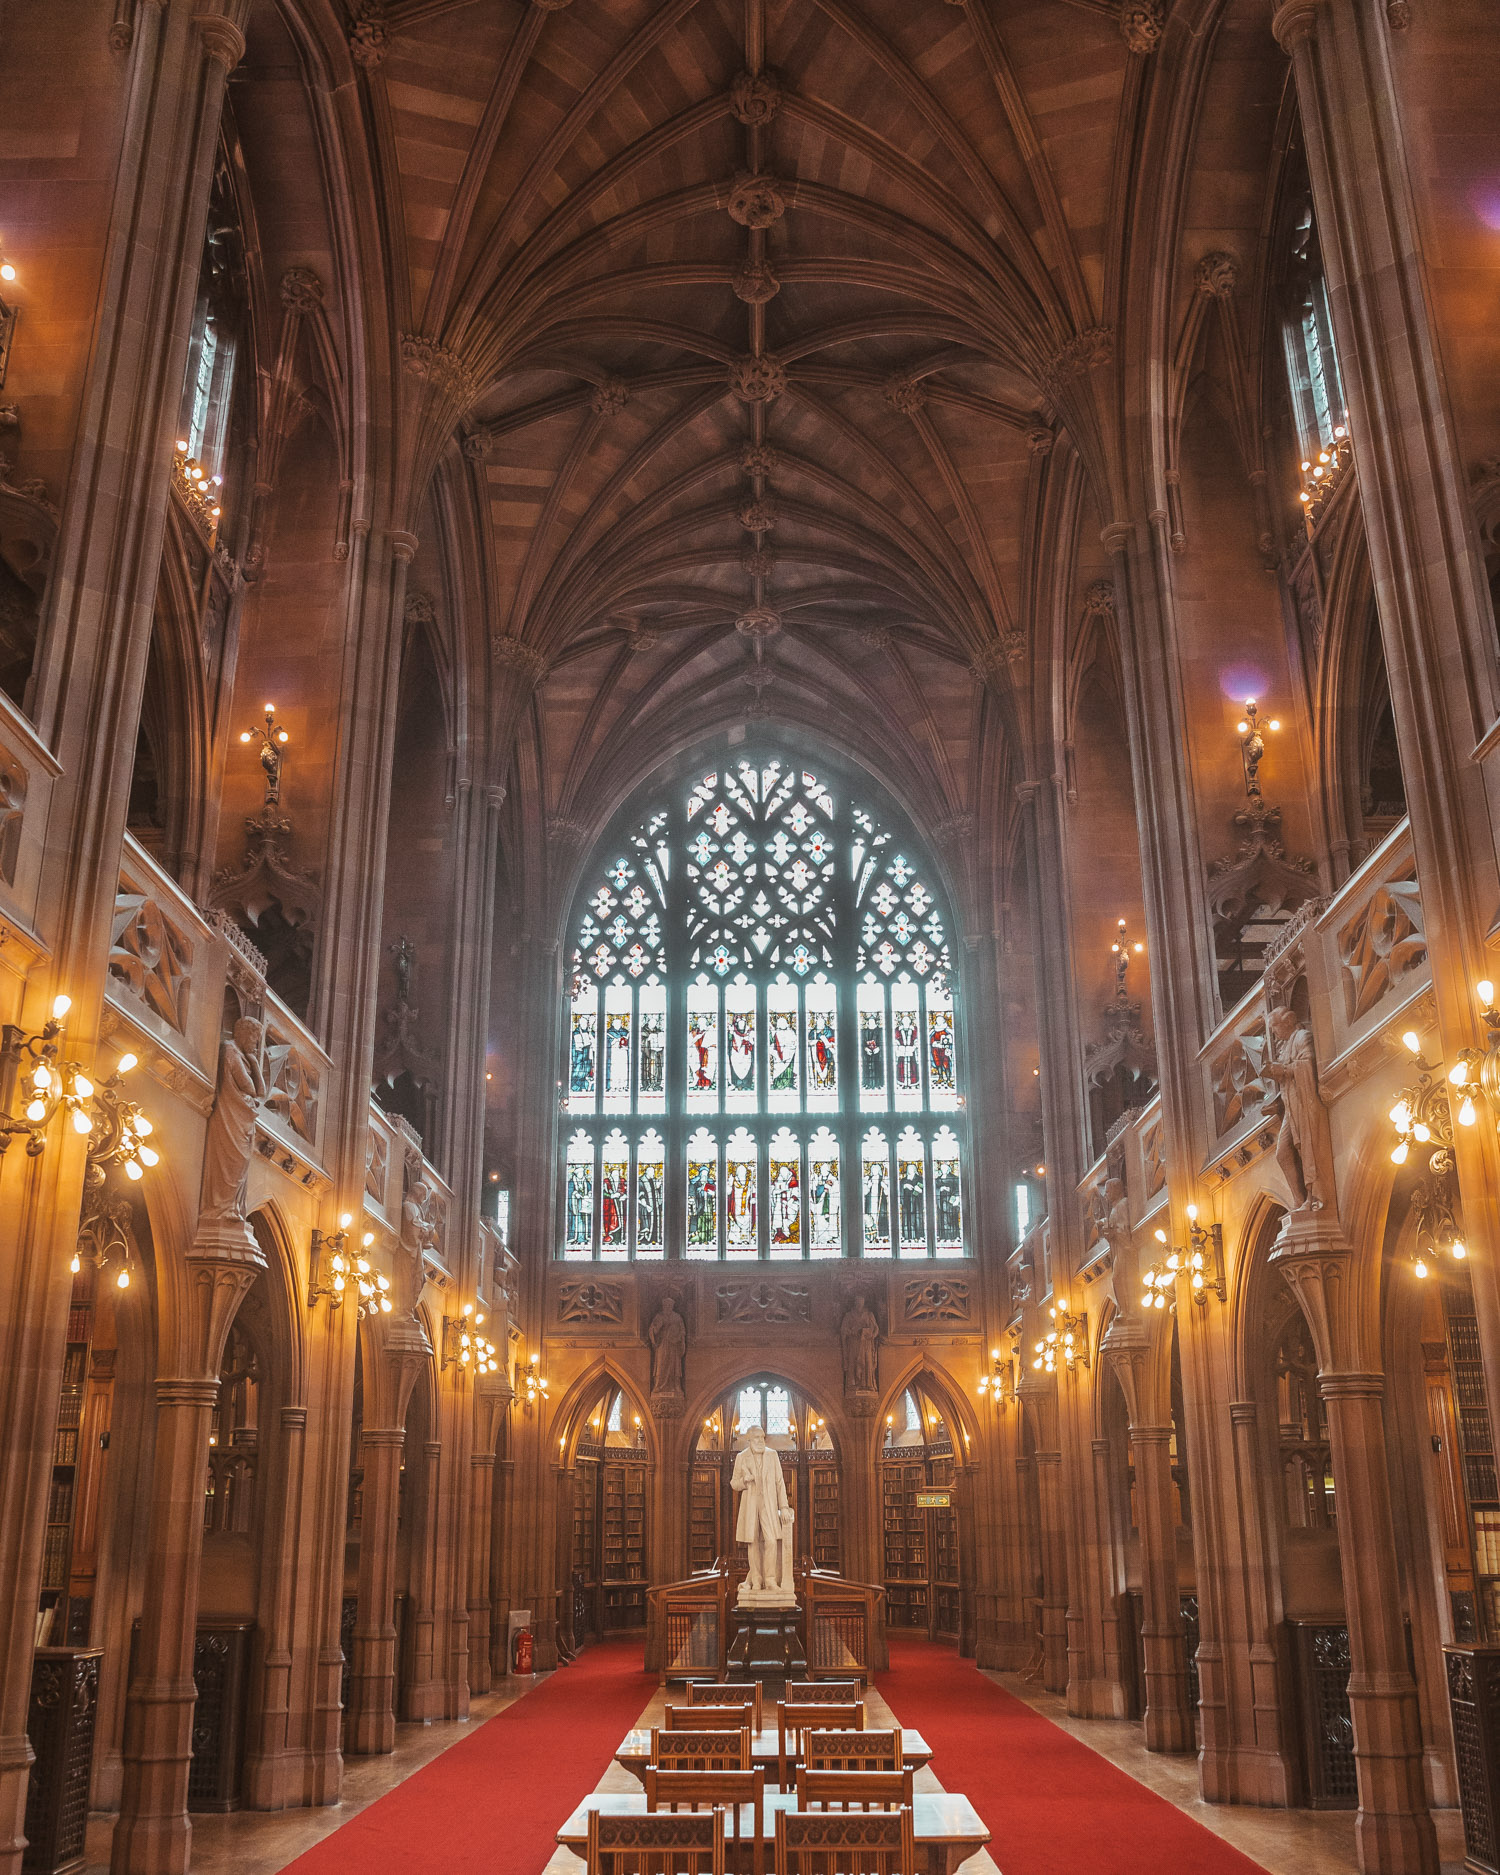 John Rylands Library - The Best Photo Spots in Manchester, England